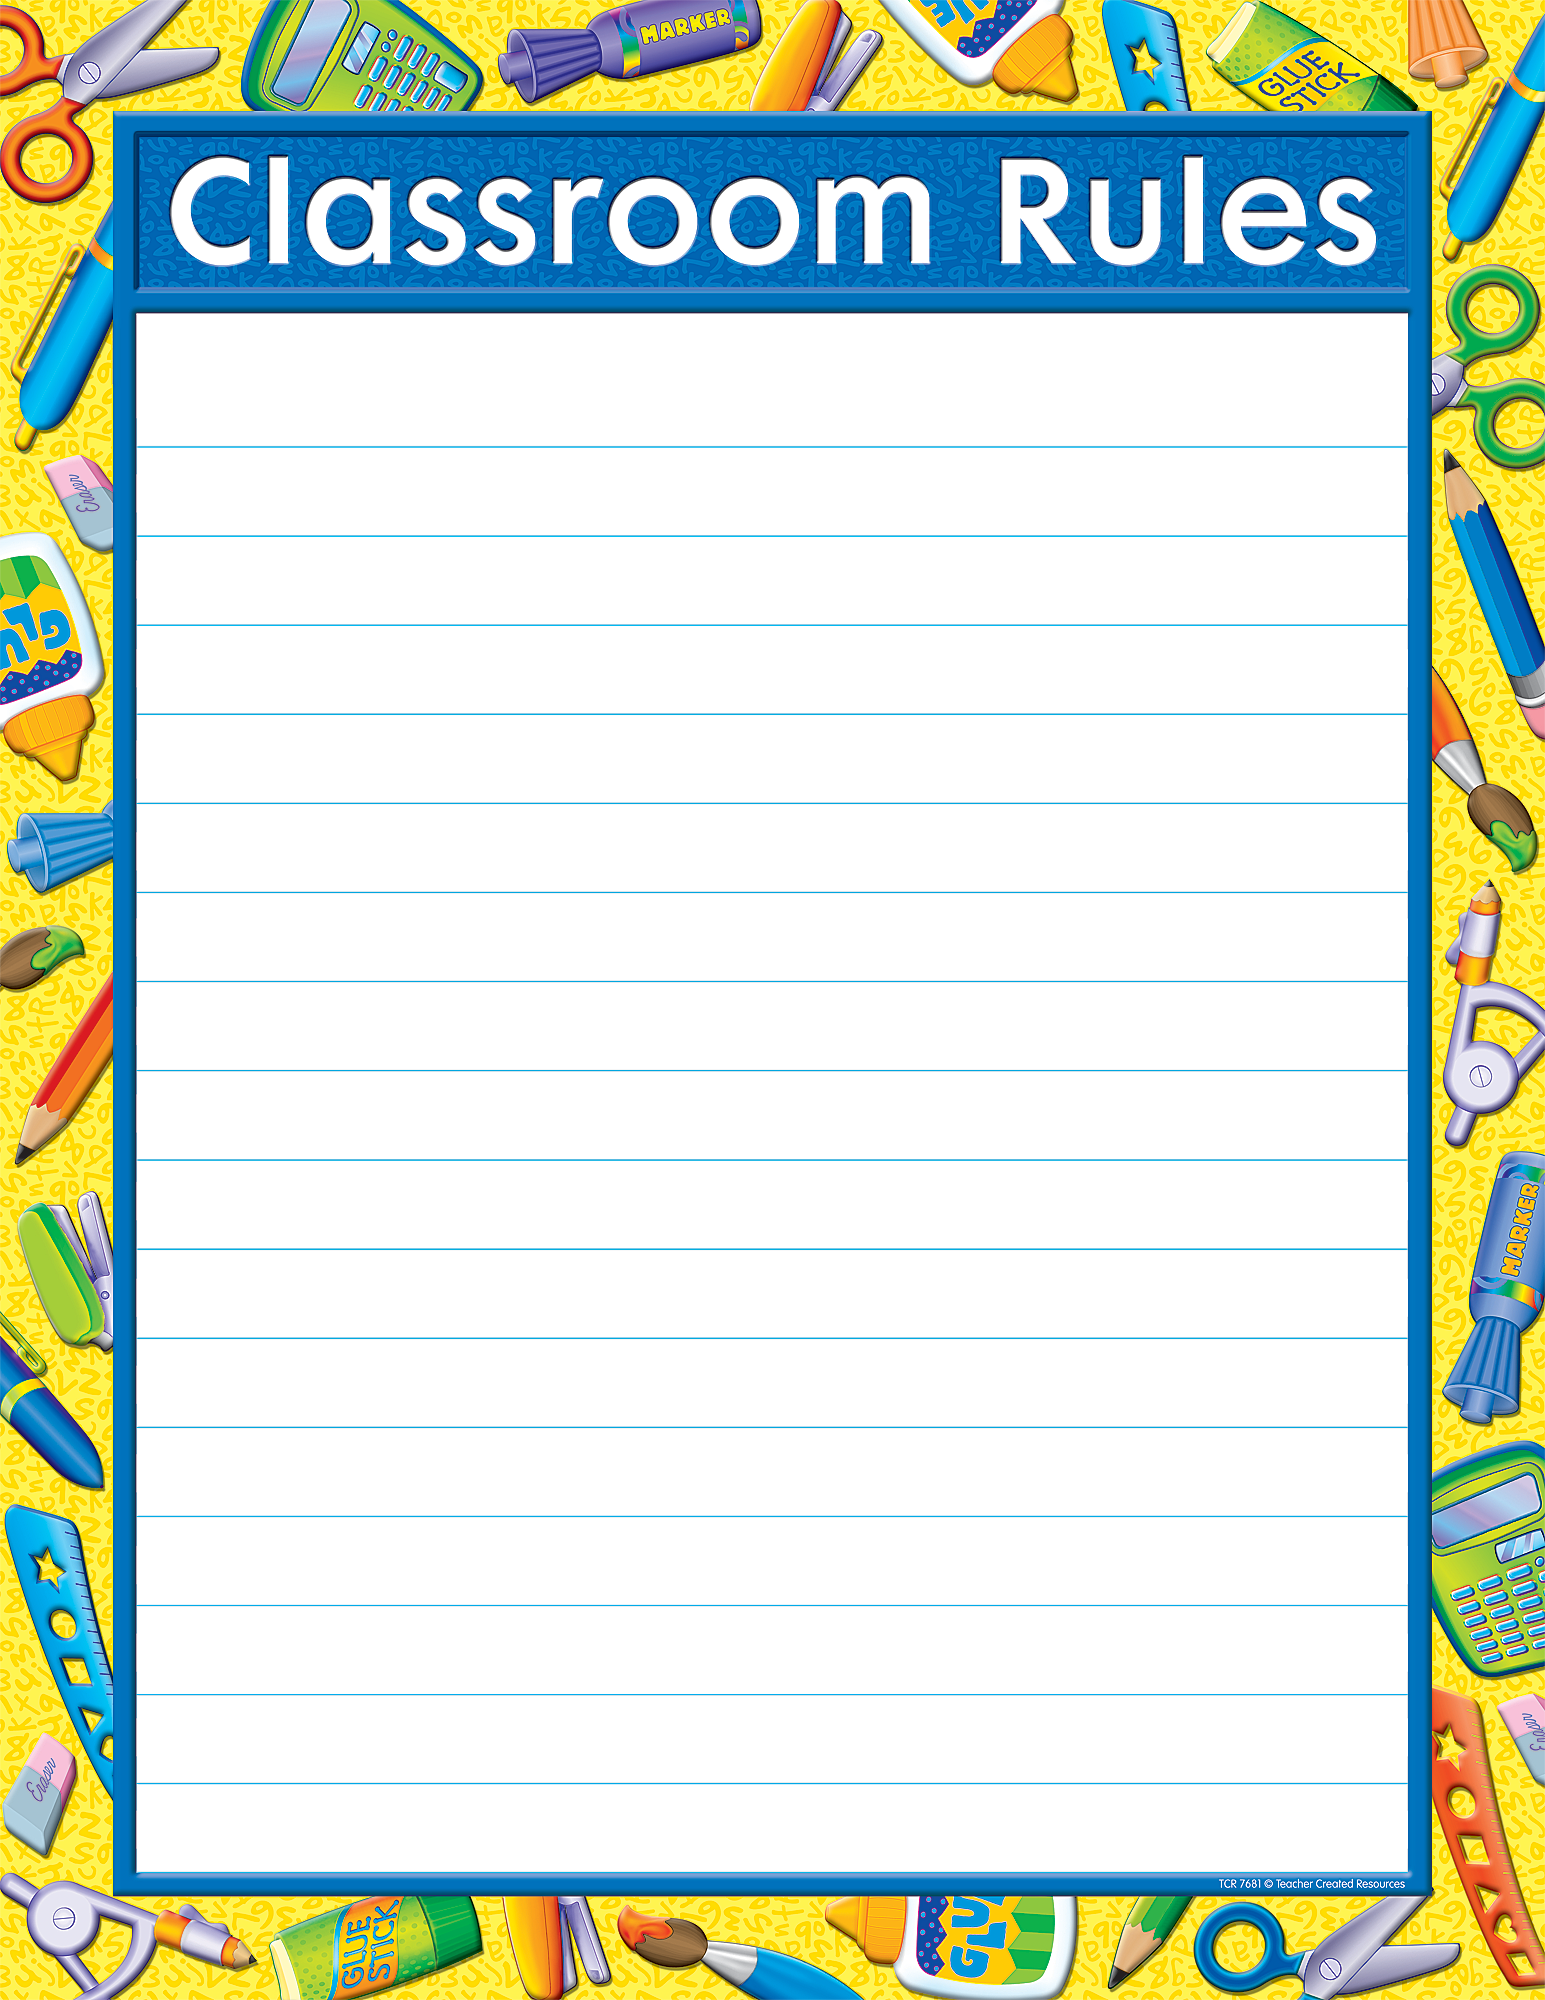 classroom-rules-template-for-teachers-hang-in-your-classroom-as-a